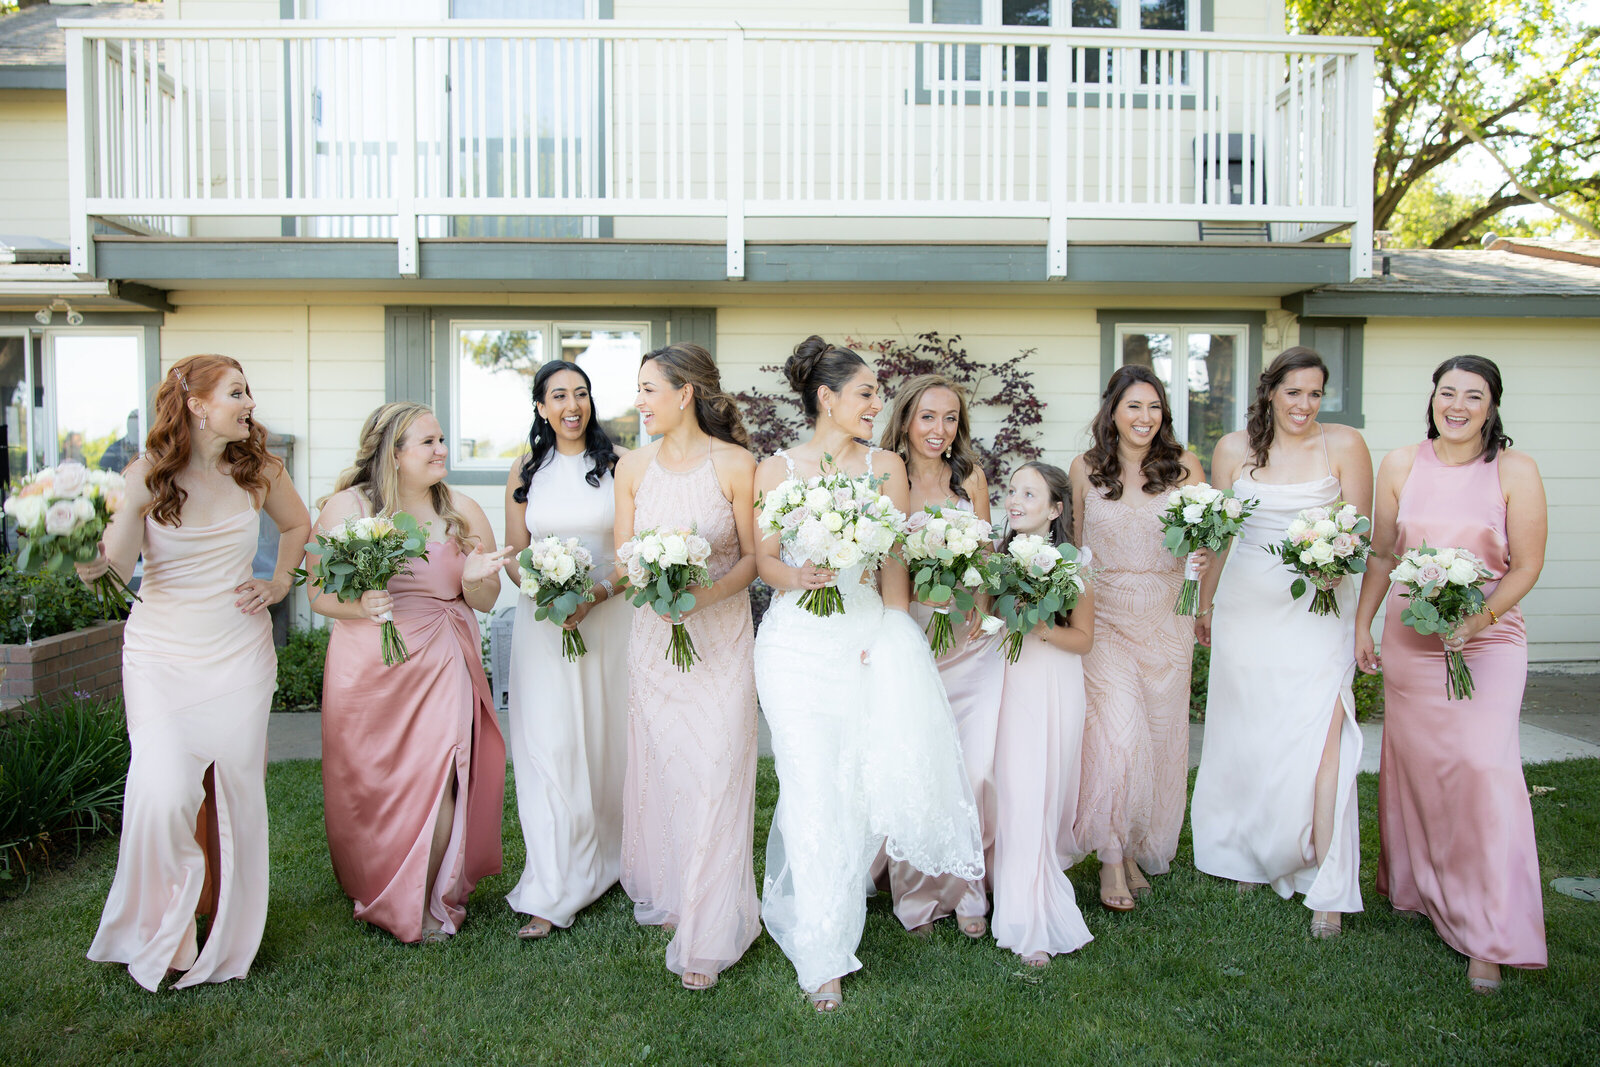 Bride walks with her bridesmaids who are dressed in different shades of pink.  They laugh and walk in front of a house. Photo captured by sacramento wedding photography studio, philippe studio pro.